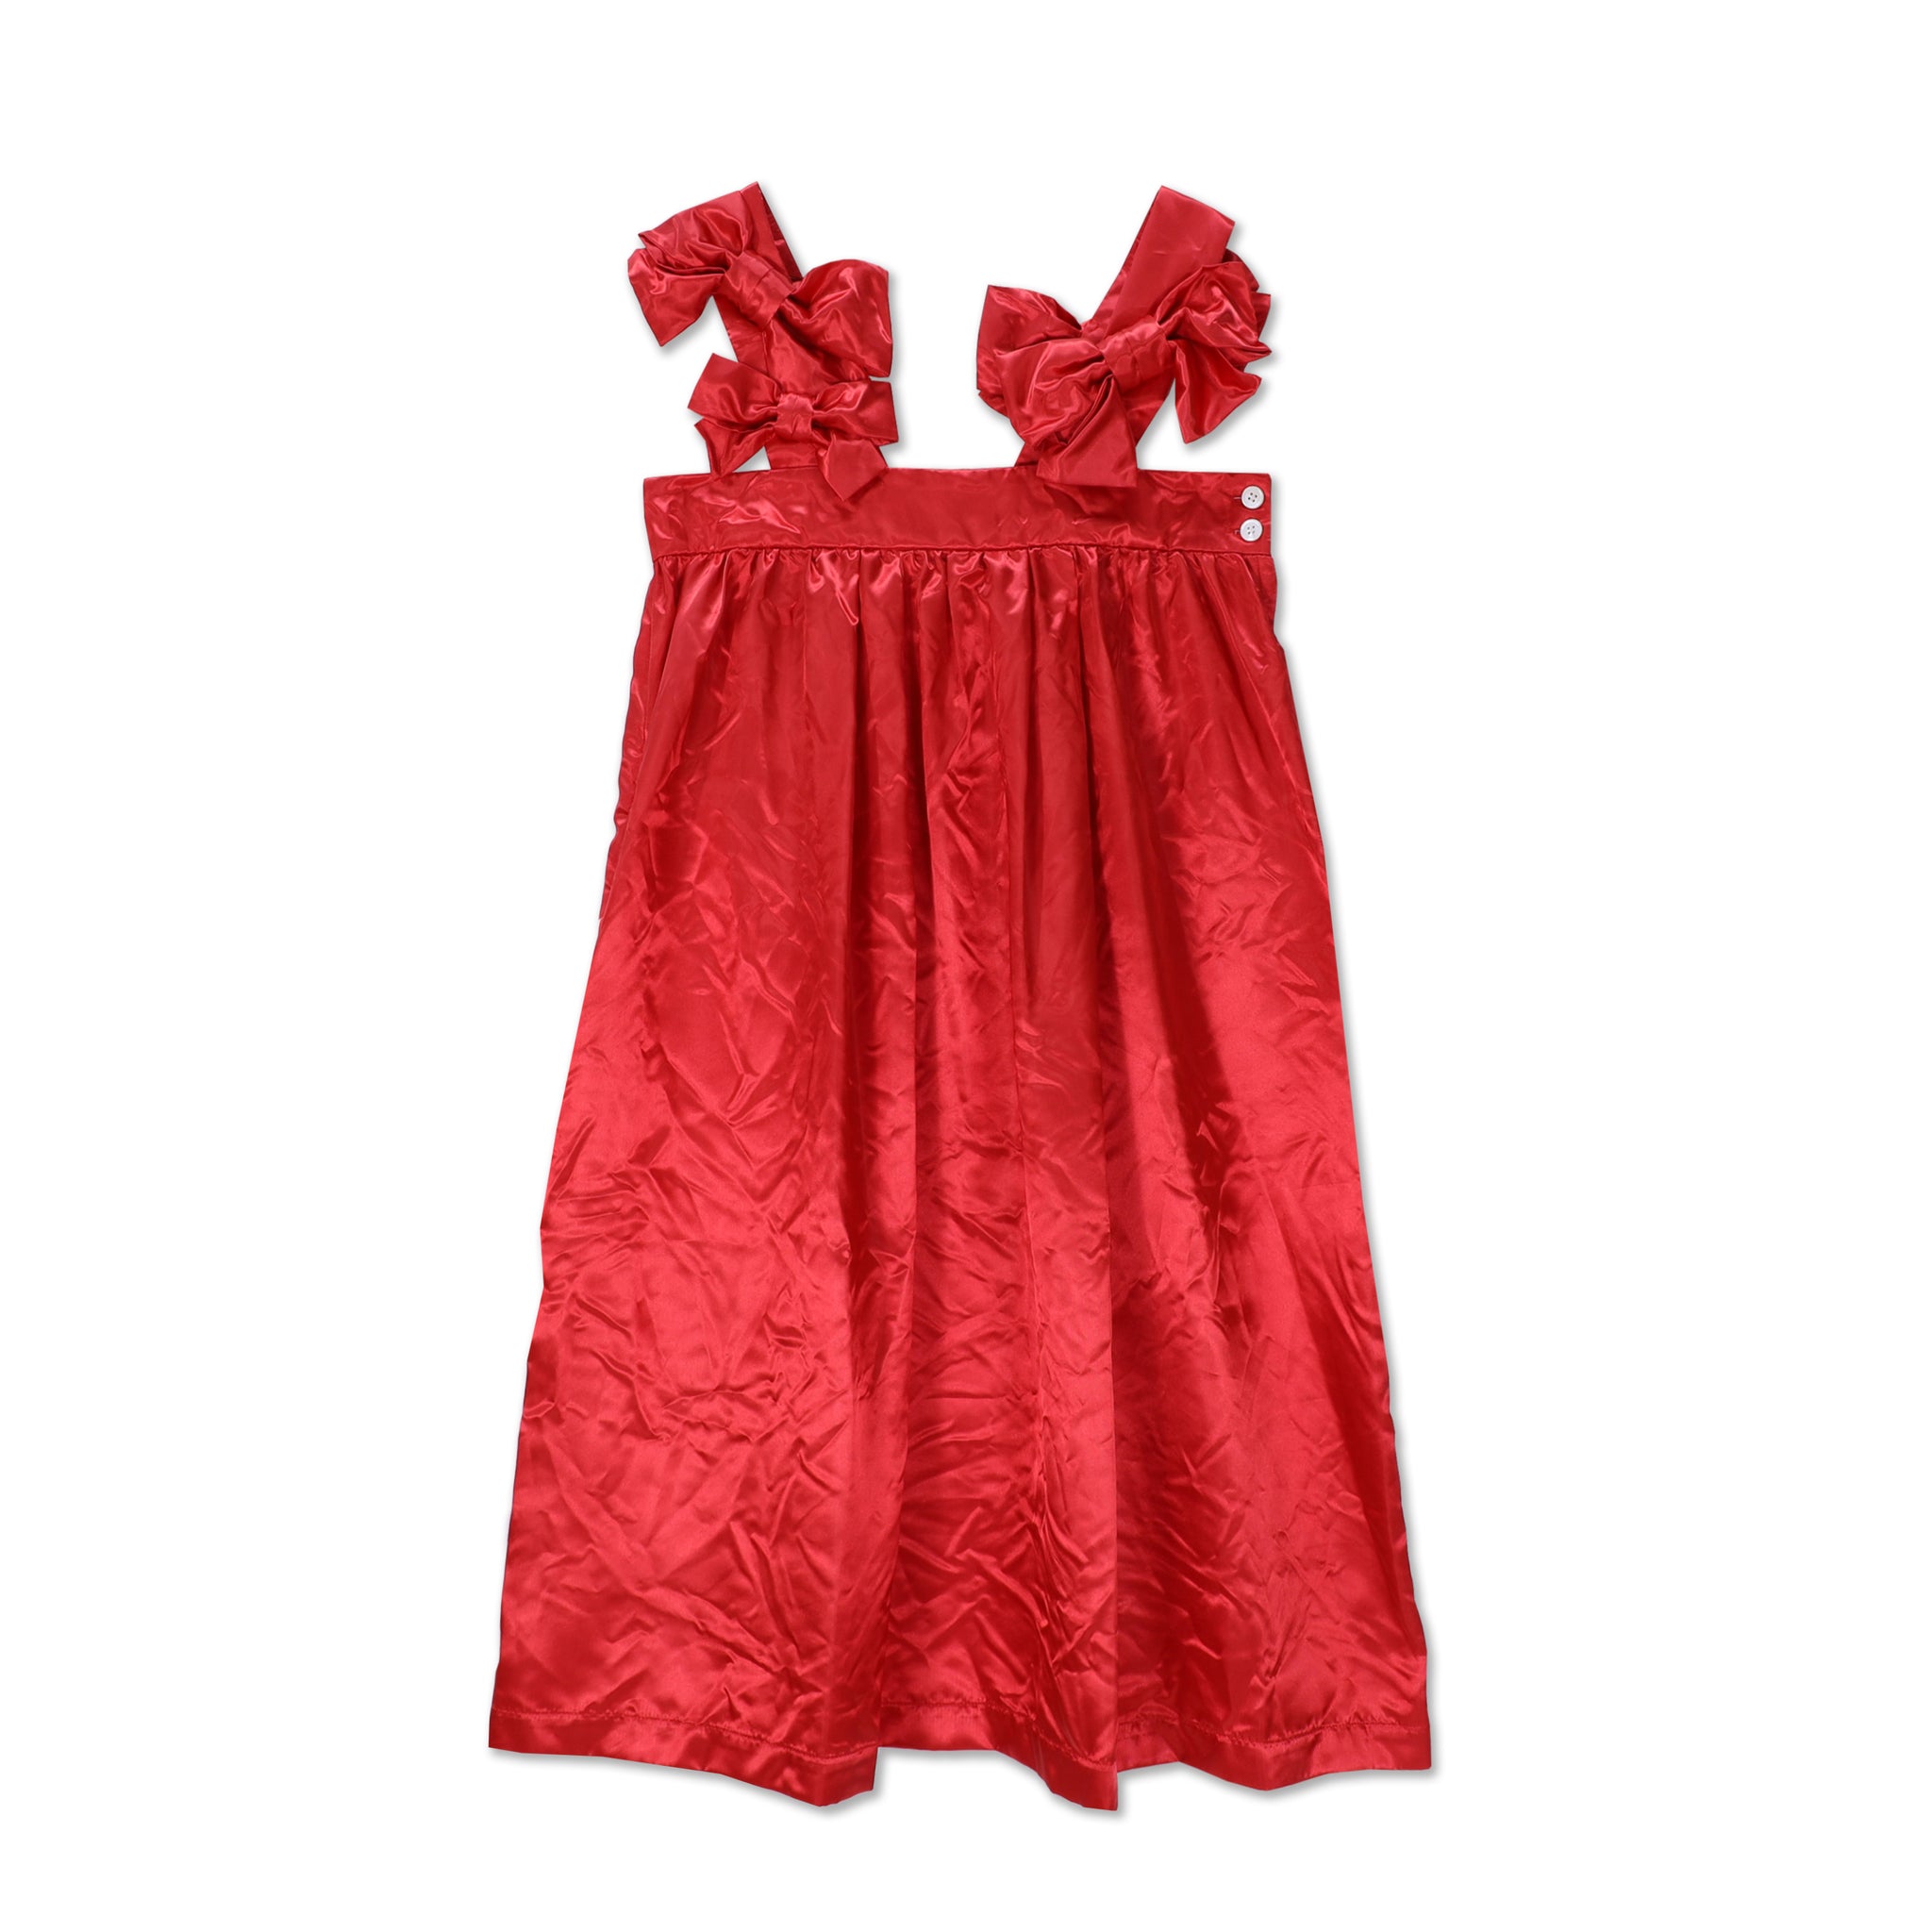 Red Satin Bow Dress